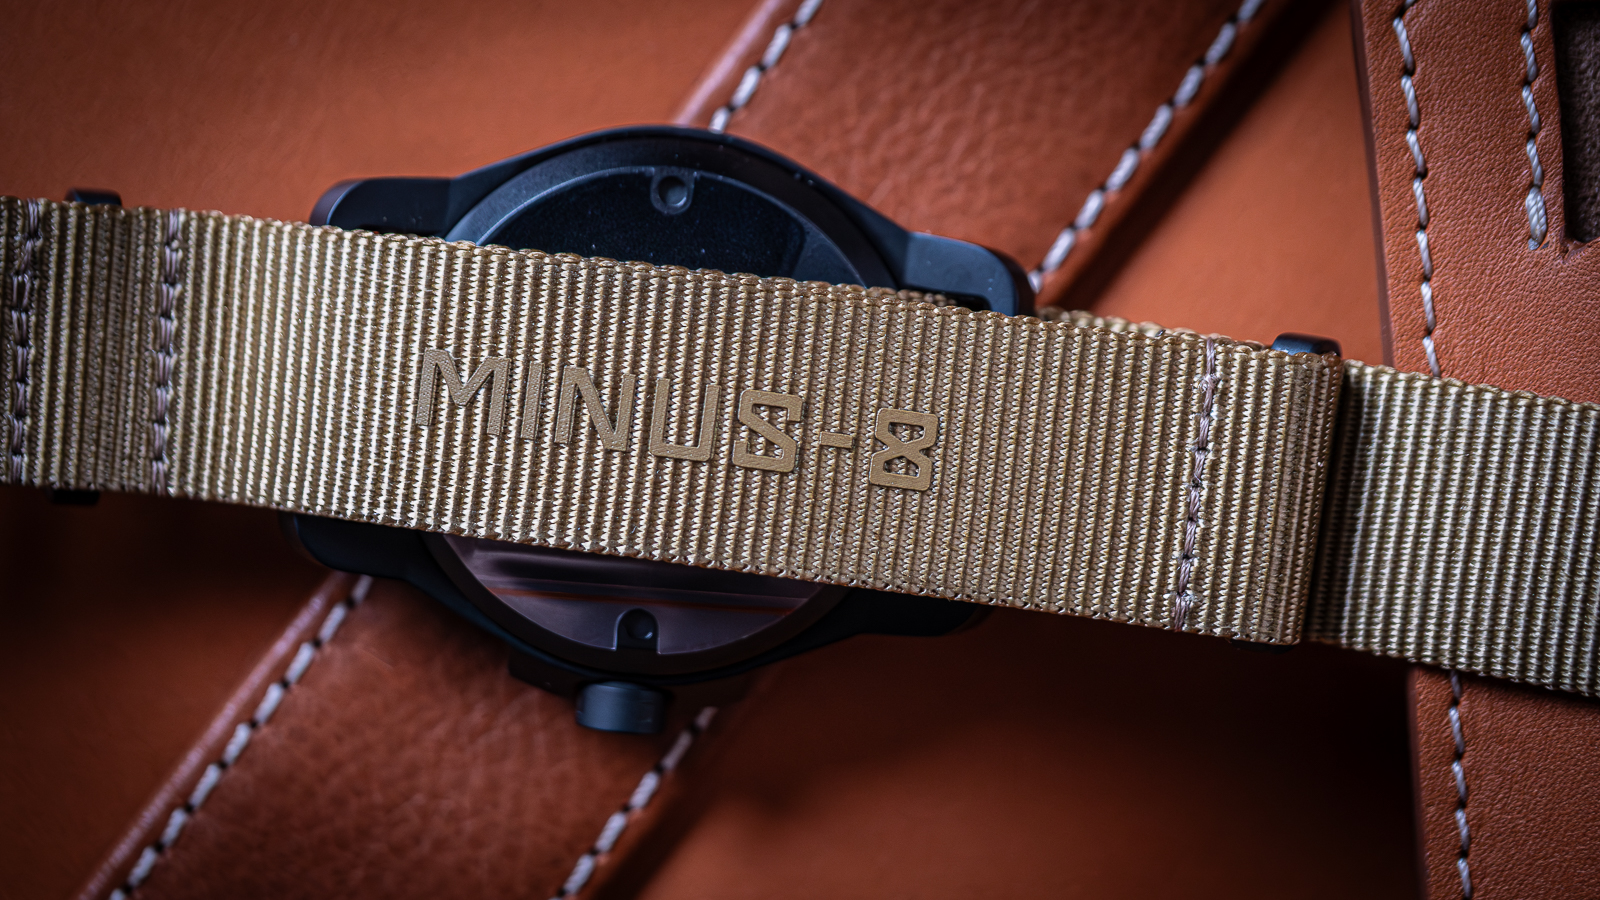 Minus-8 Elevates Your Wrist with the Diver 2.0 and Field 1S